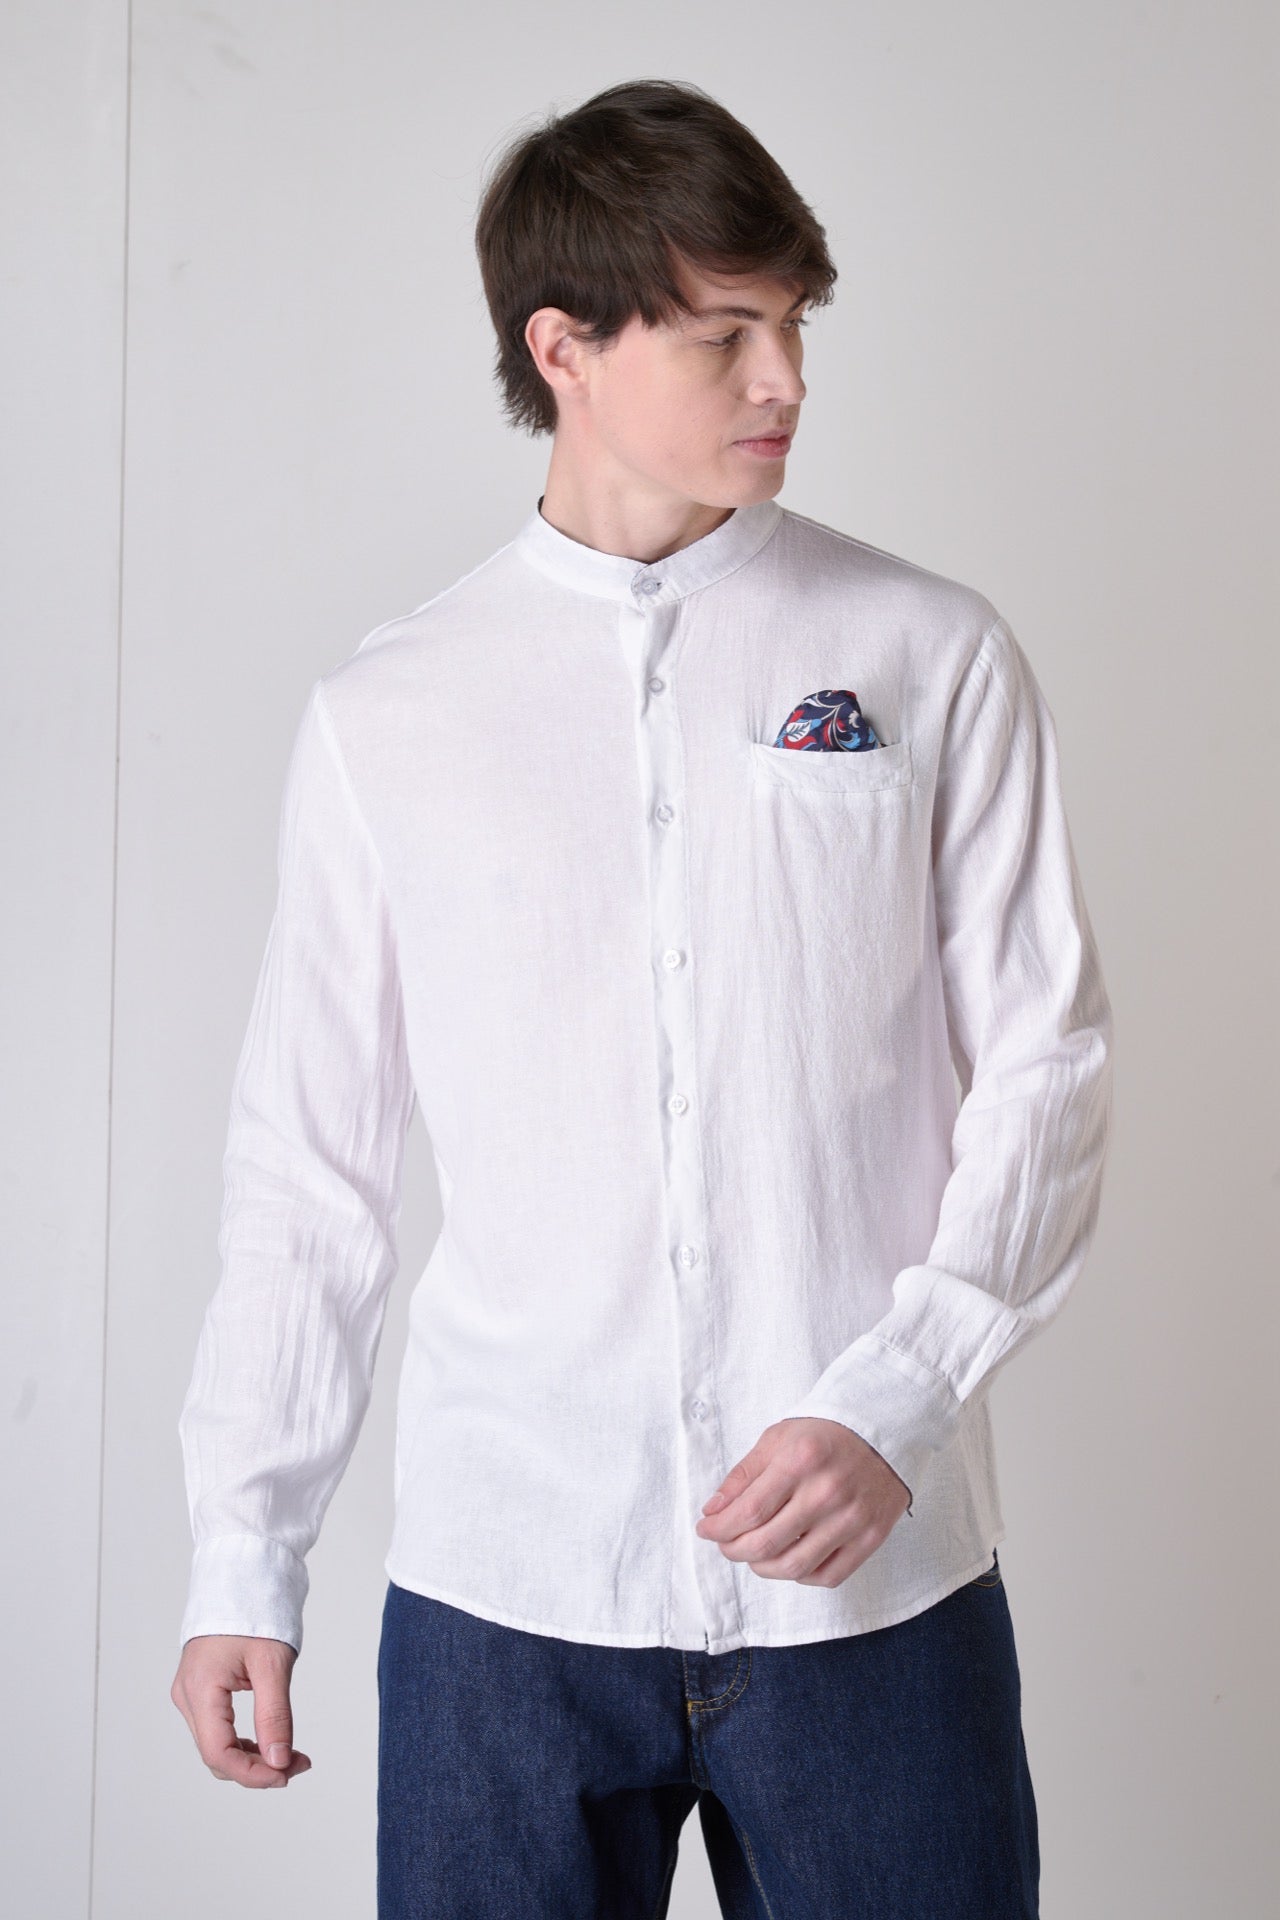 White Linen Korean Tailored Shirt with Pochette, interior and cuffs in V2 fabric